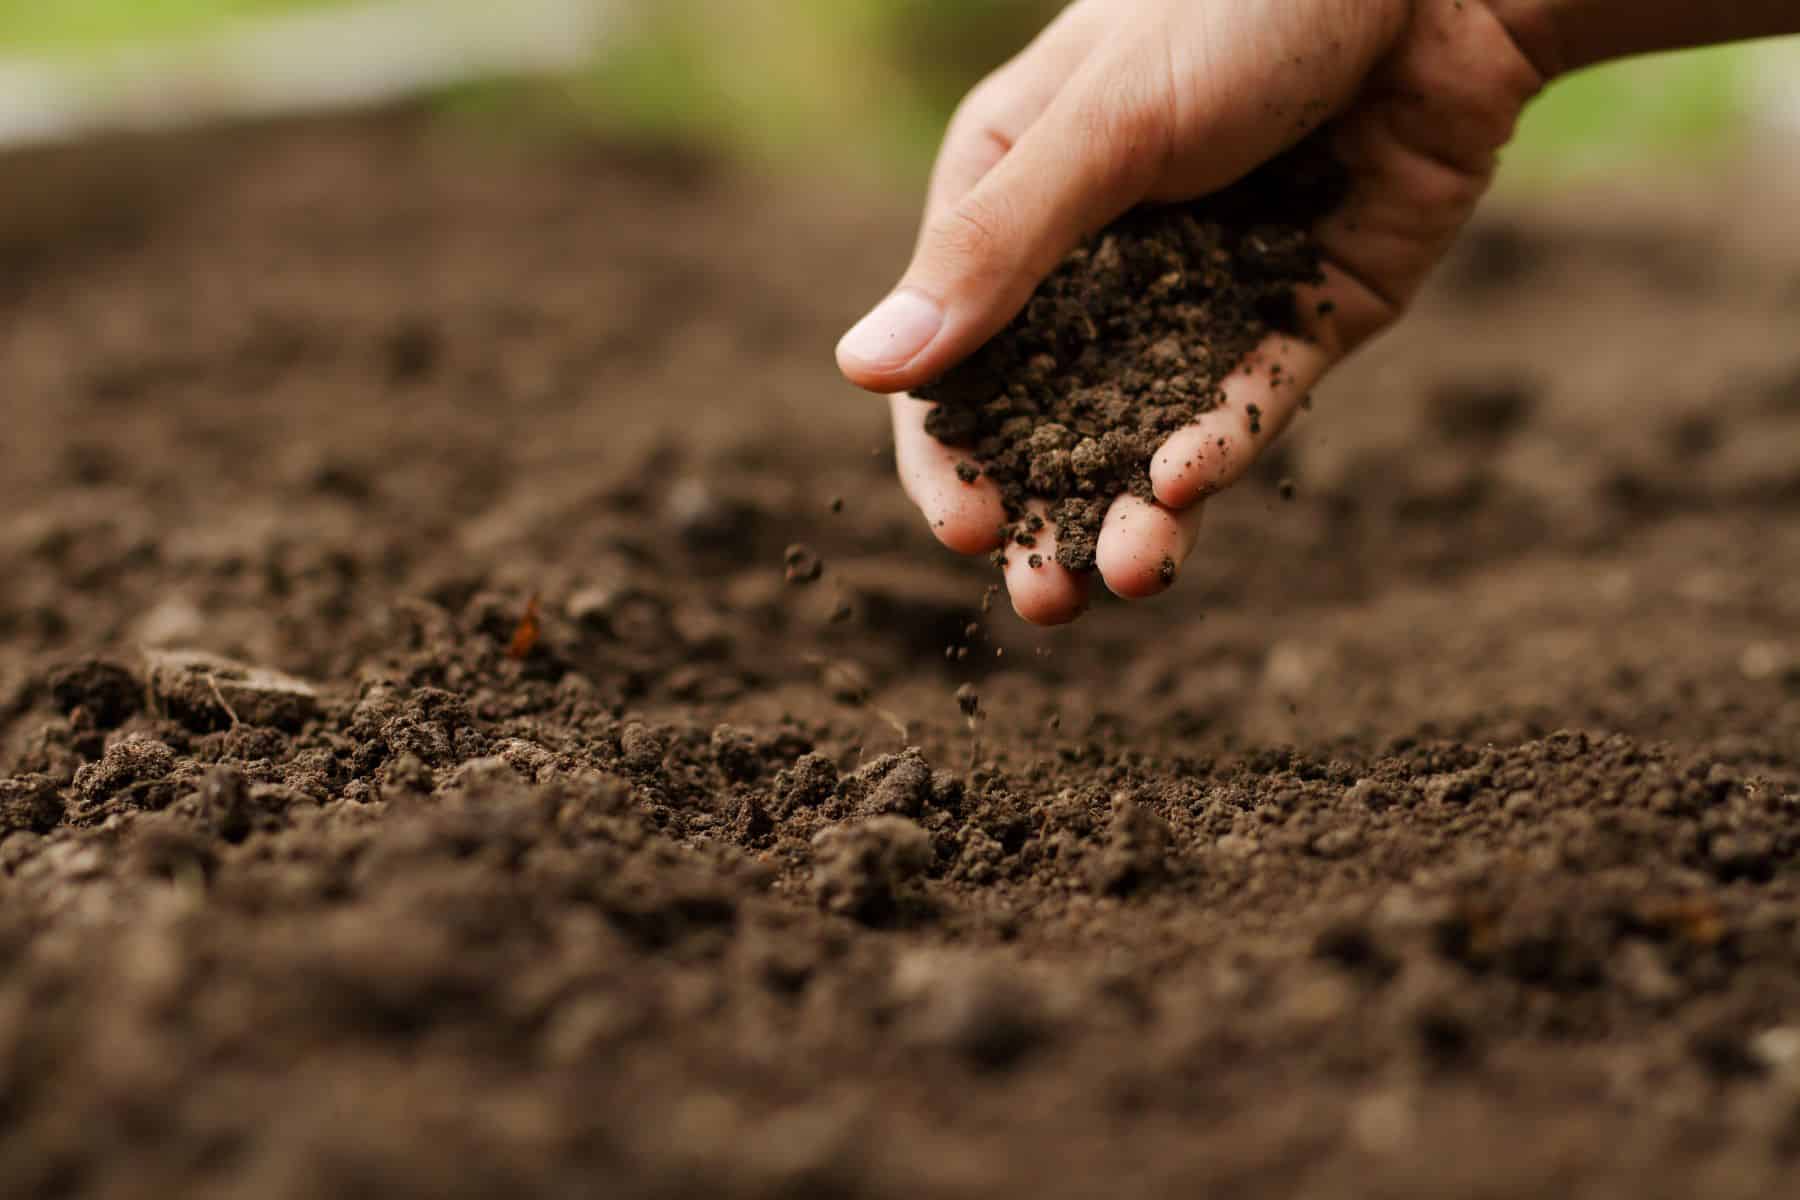 soil testing is the first step toward healthy plants